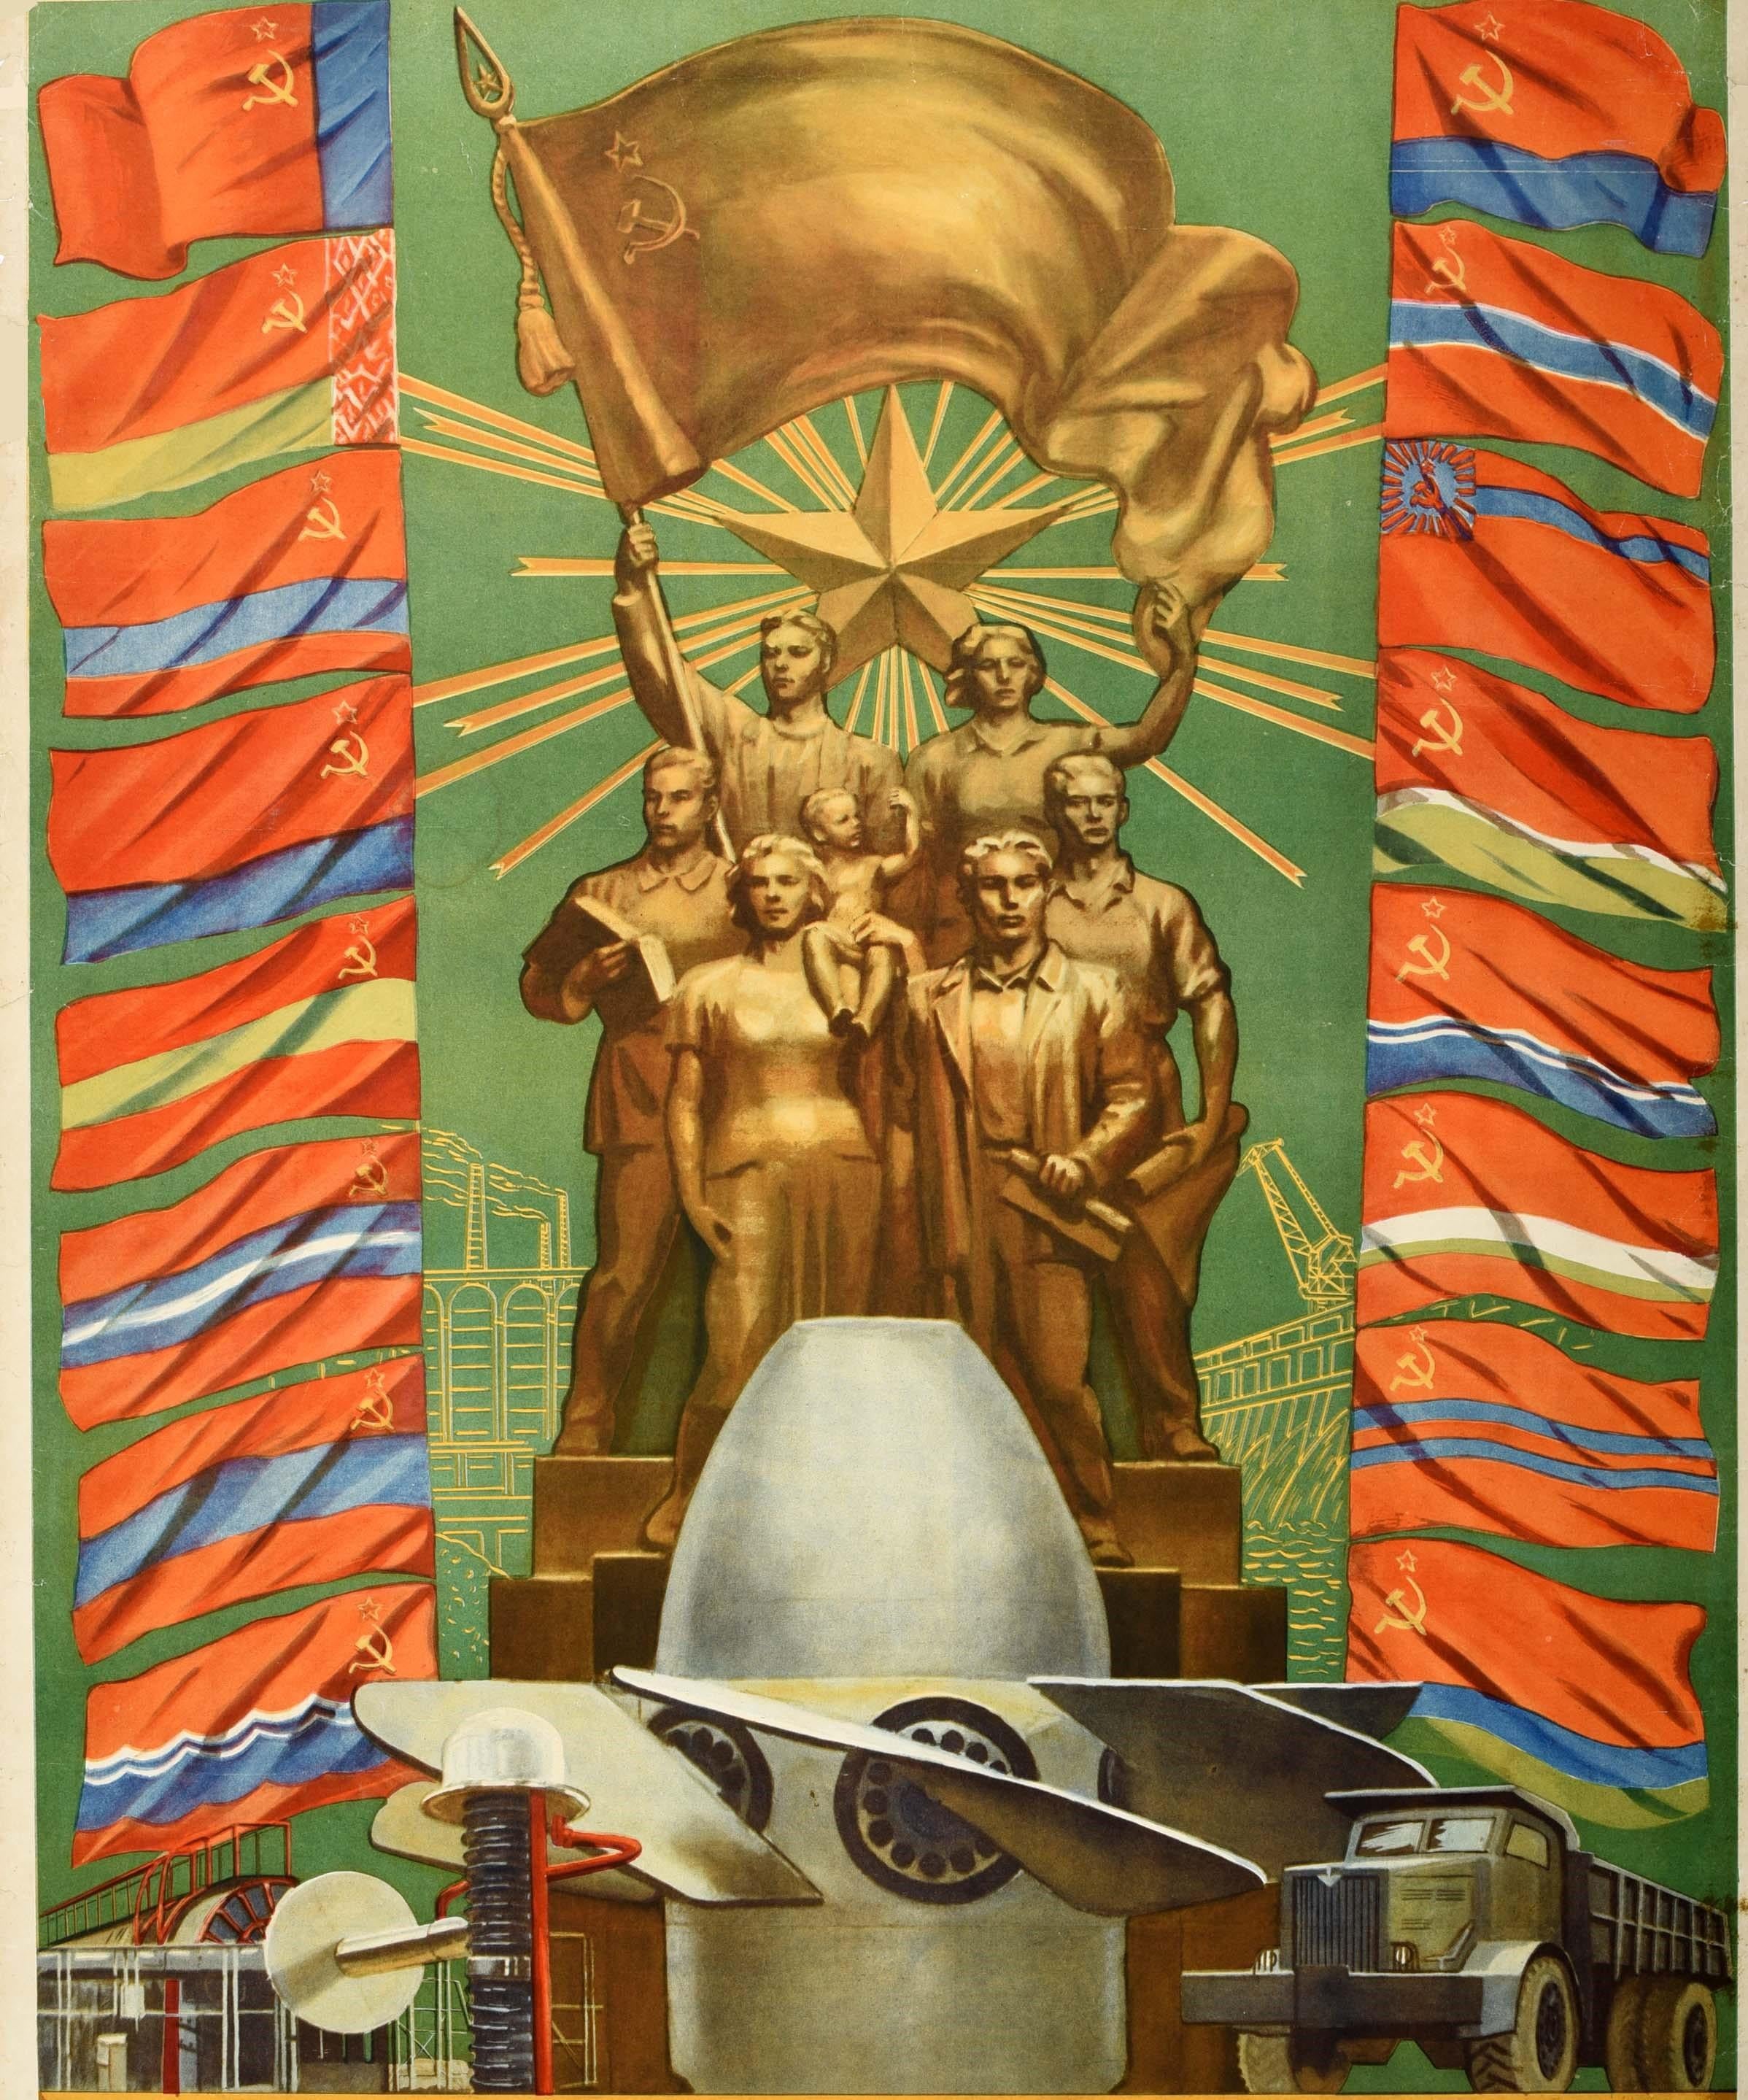 Original vintage Soviet propaganda poster for an All-Union Industrial Exhibition A School of Technical Progress and Excellence featuring a statue design showing various people including some holding books and papers, a mother holding a child and